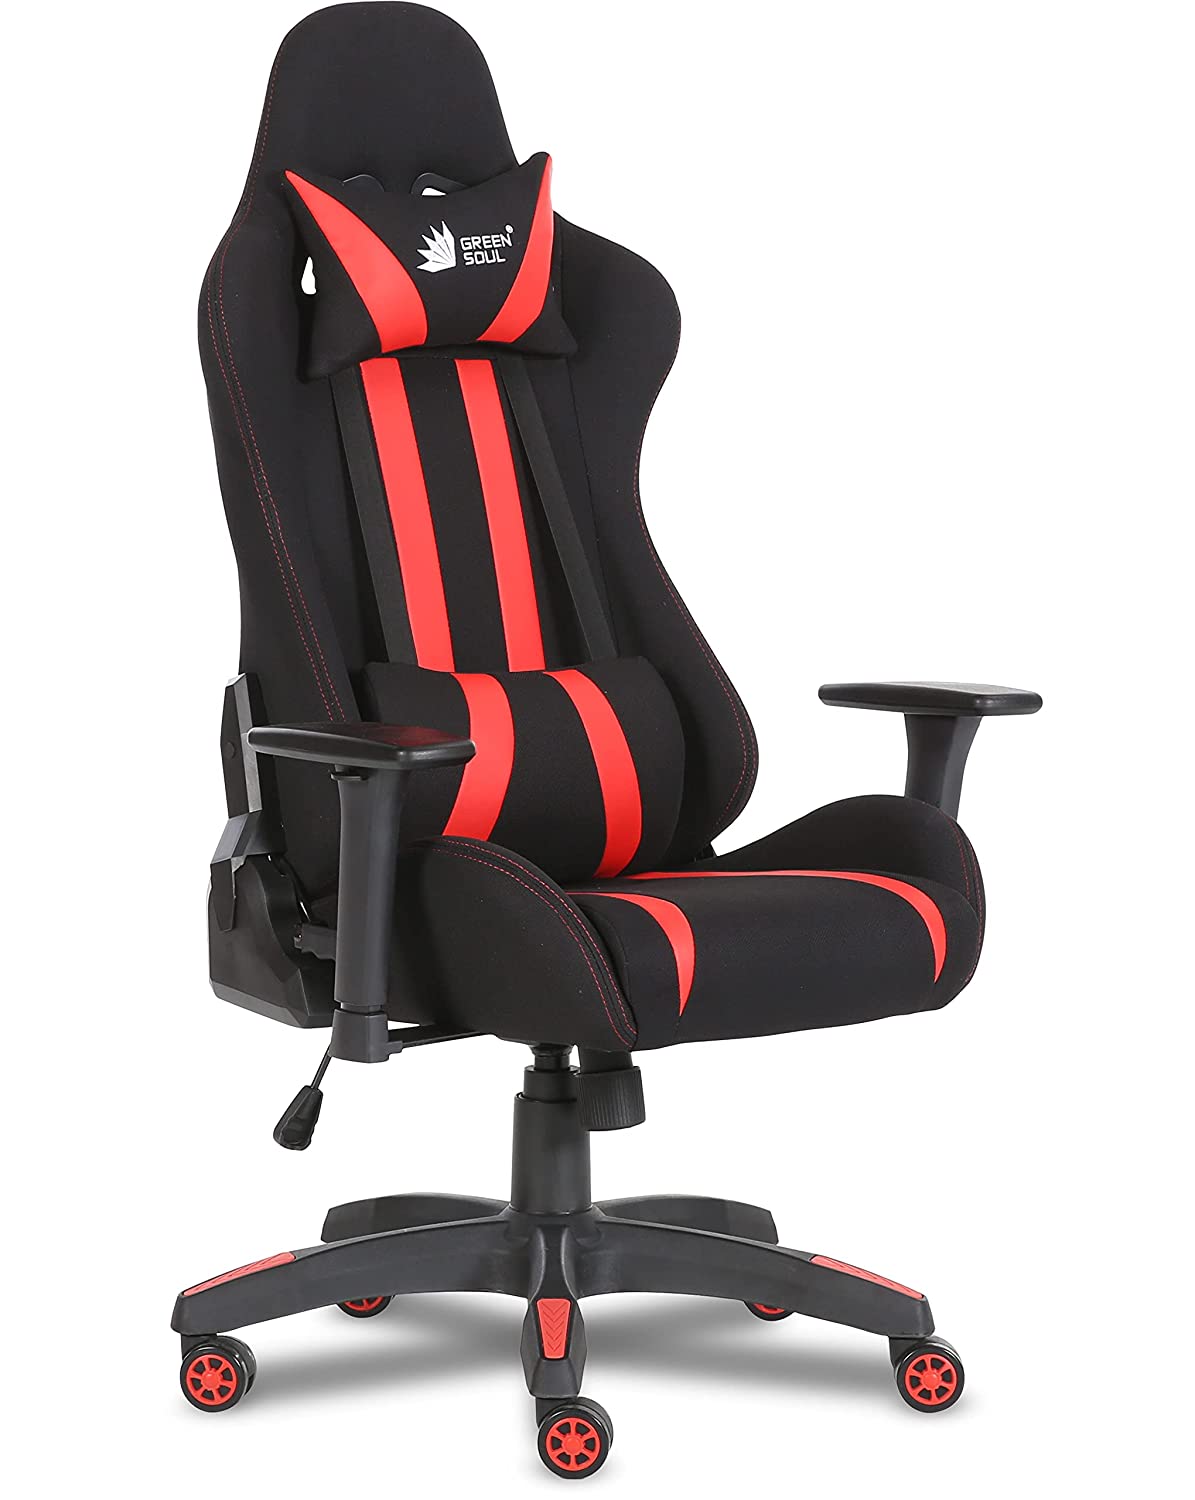 Green Soul Beast Series Fabric and PU Leather Gaming/Ergonomic Chair